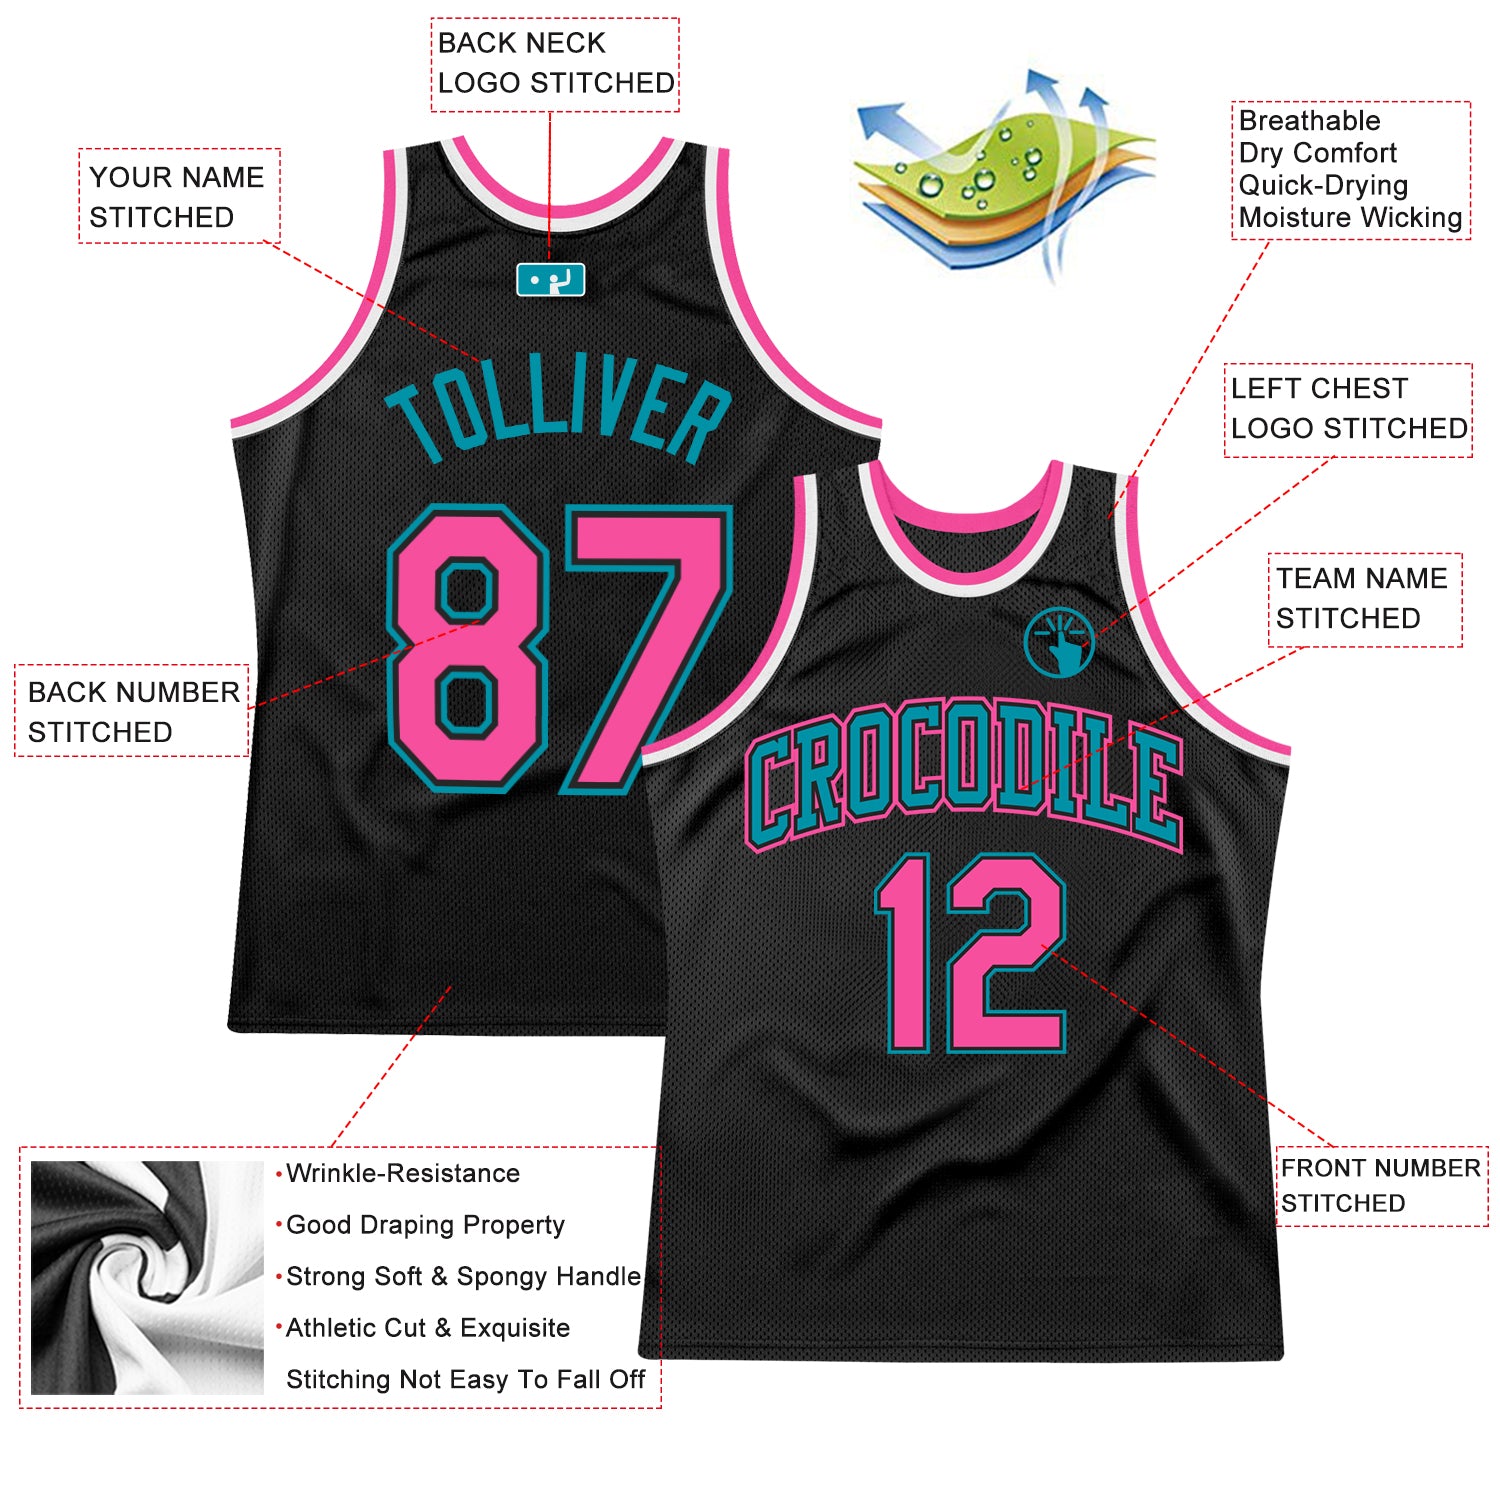 Bijwonen Postbode barbecue Custom Black Pink-Teal Authentic Throwback Basketball Jersey Discount